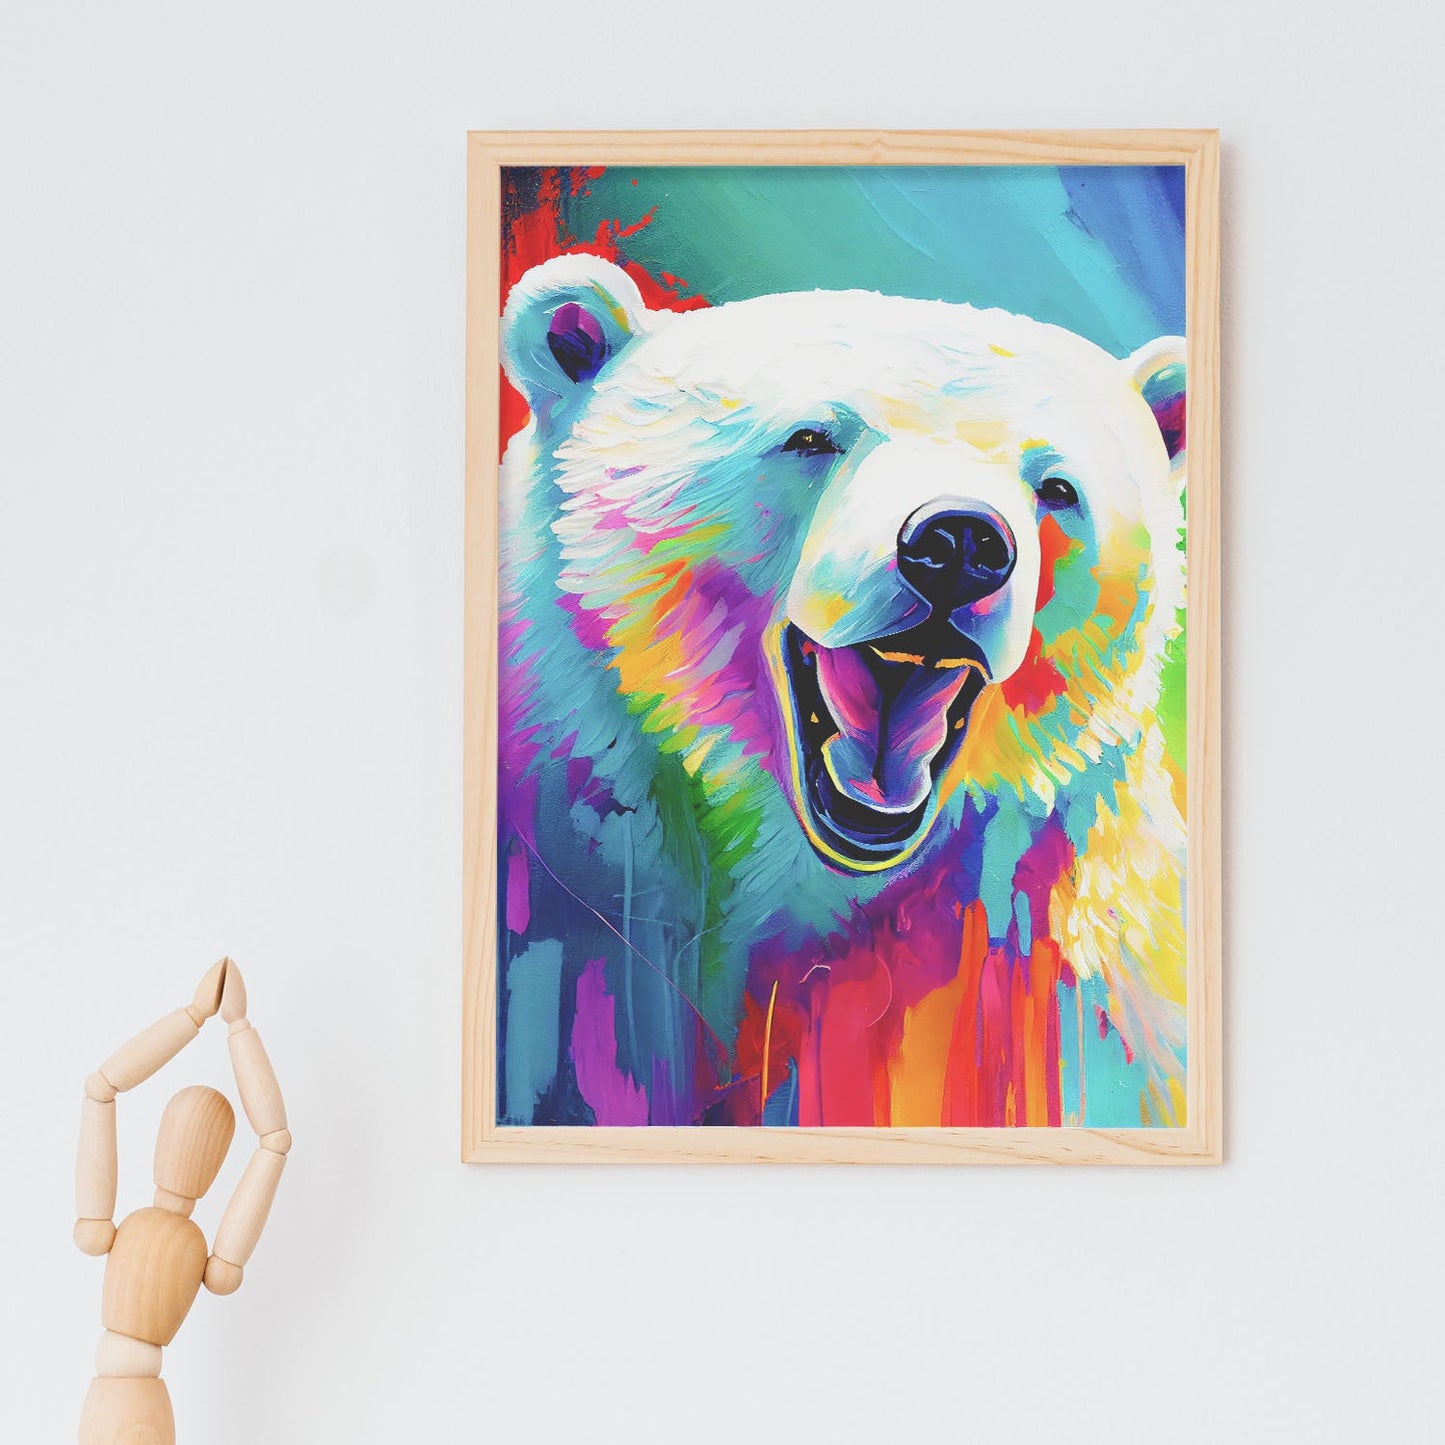 Nacnic Abstract smiling Polar Bear in Lisa Fran Style_2. Aesthetic Wall Art Prints for Bedroom or Living Room Design.